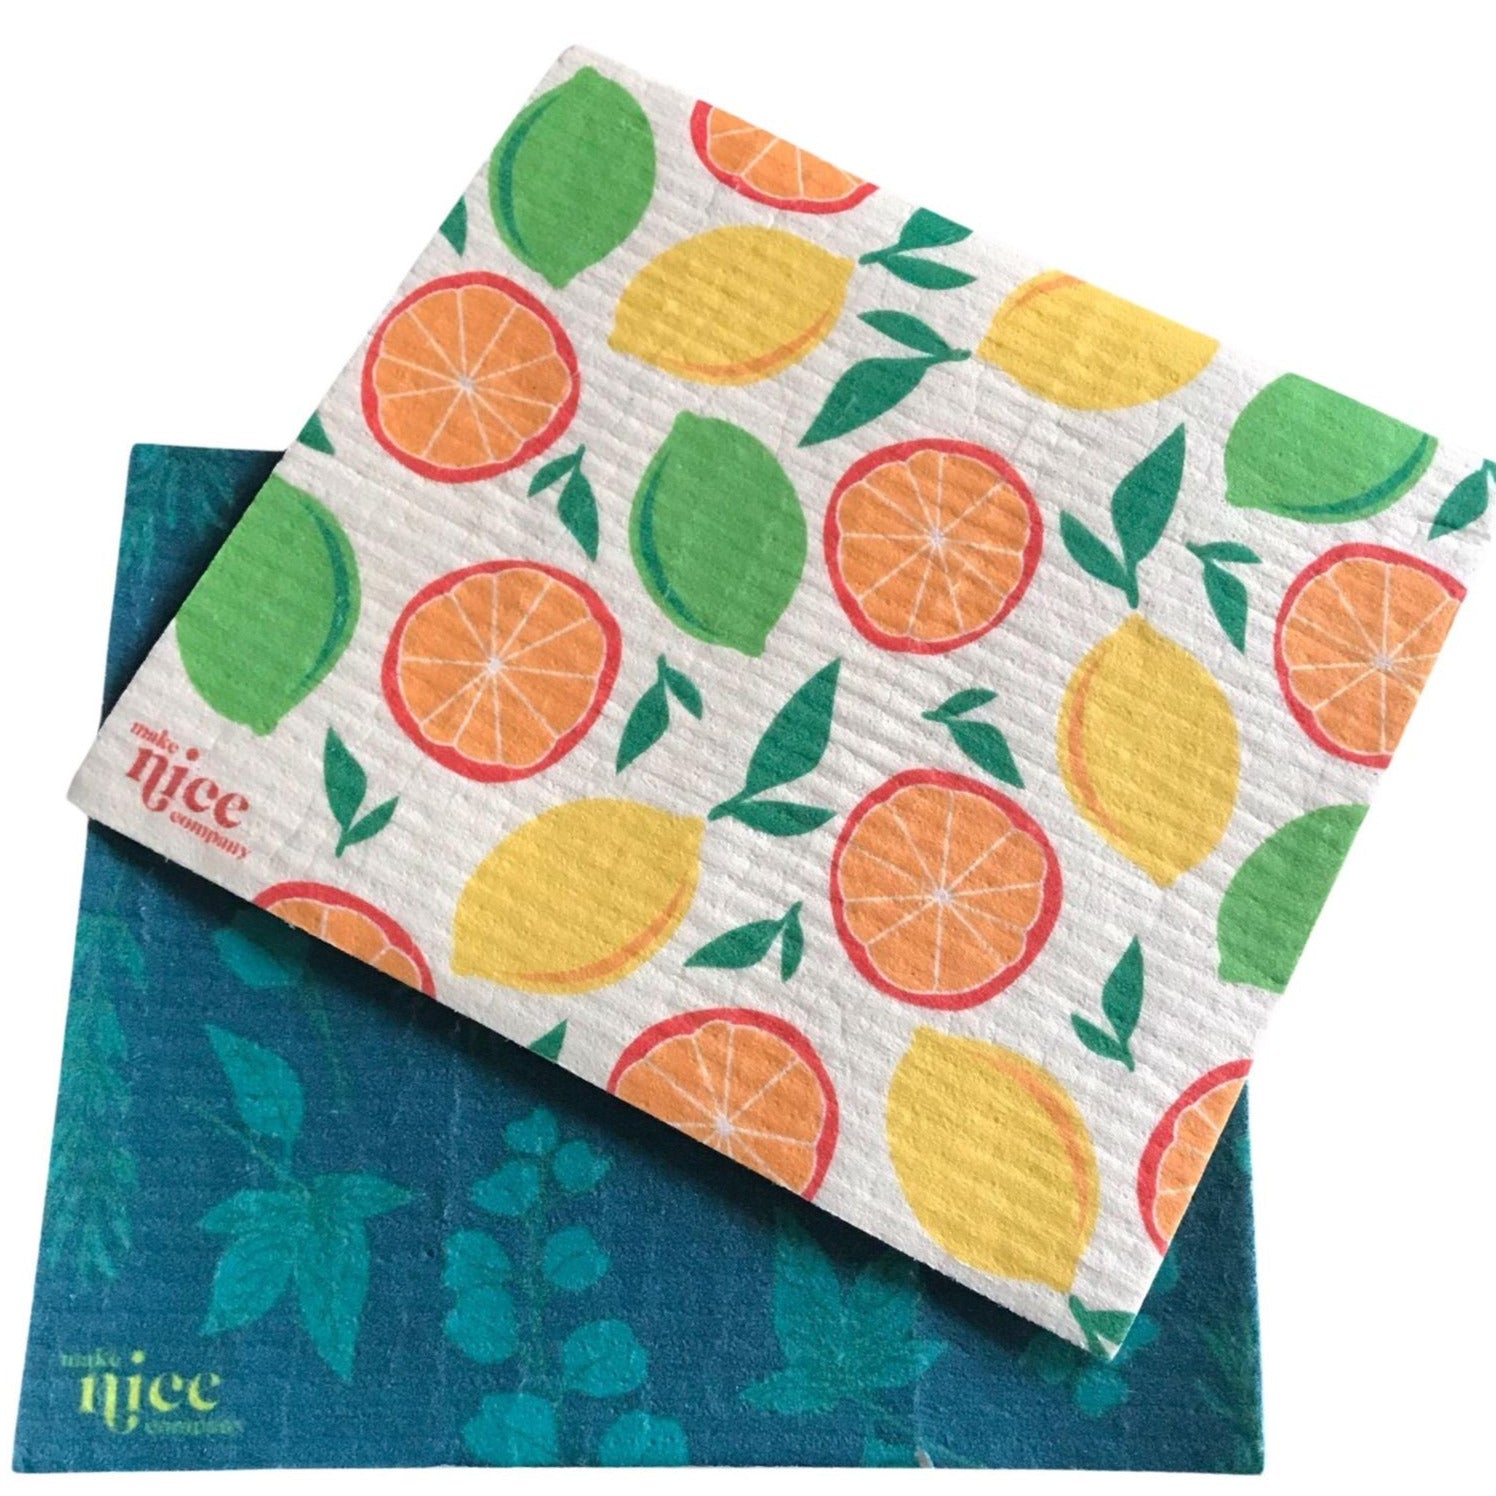 Each Make Nice Company sponge cloth in this two pack can replace up to 40+ rolls and absorb up to 15x its own weight in liquid, about 3/4 of a cup! 